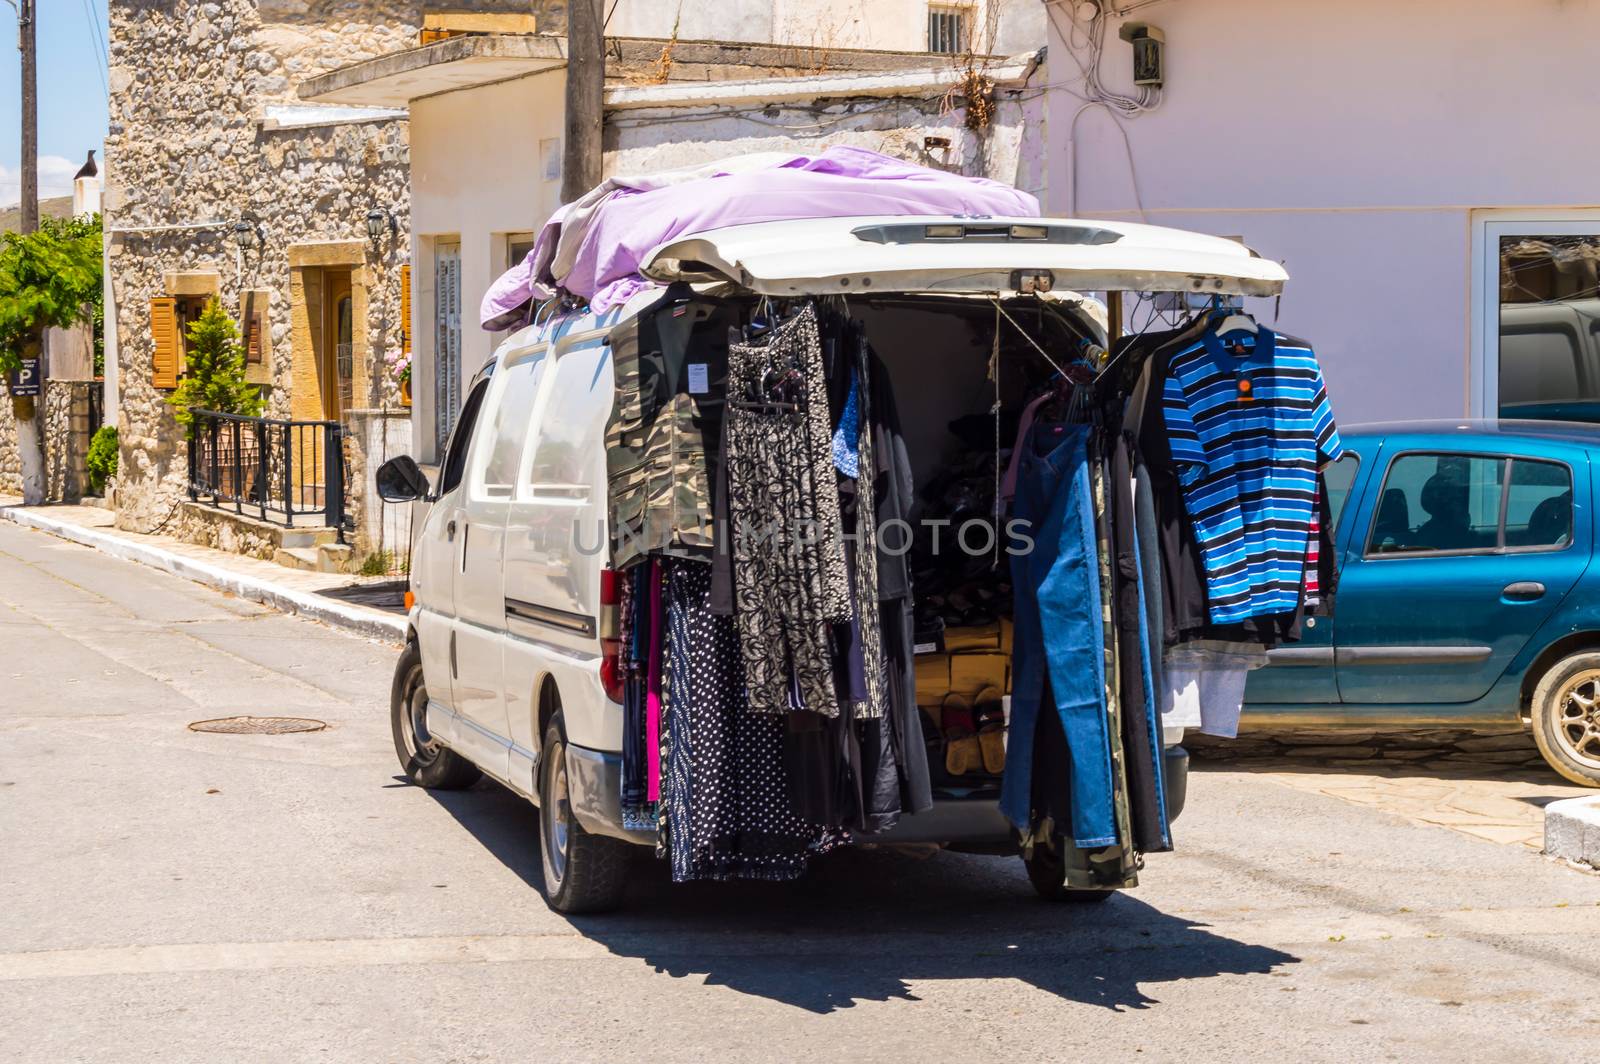 Pickup truck serving as a clothing store in a village in Crete